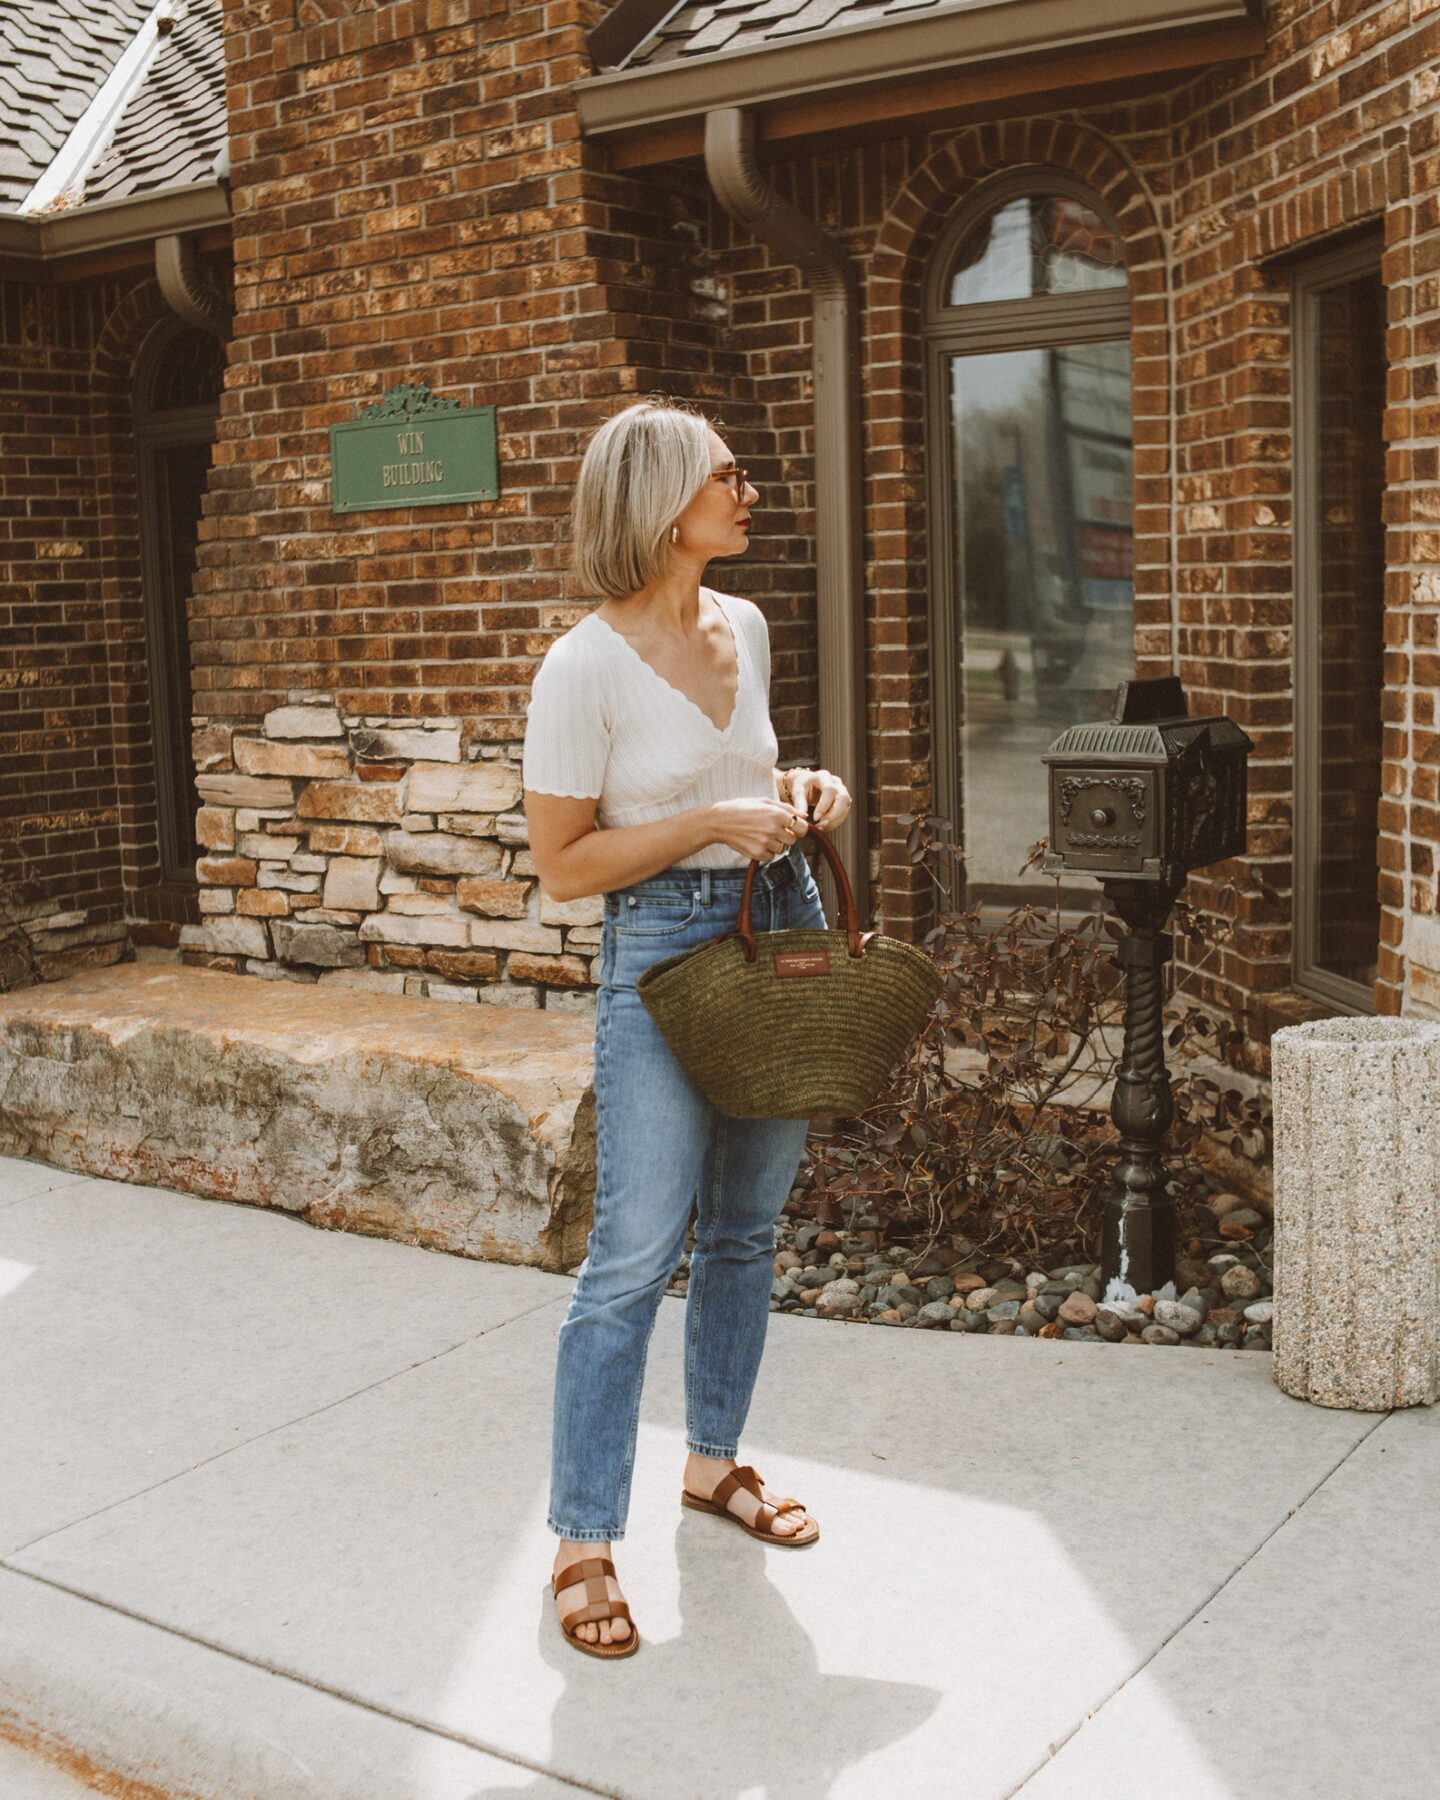 Karin Emily stands in front of a brick building wearing a white v neck tee from Sezane, a pair of blue jeans, and a khaki green justine basket bag